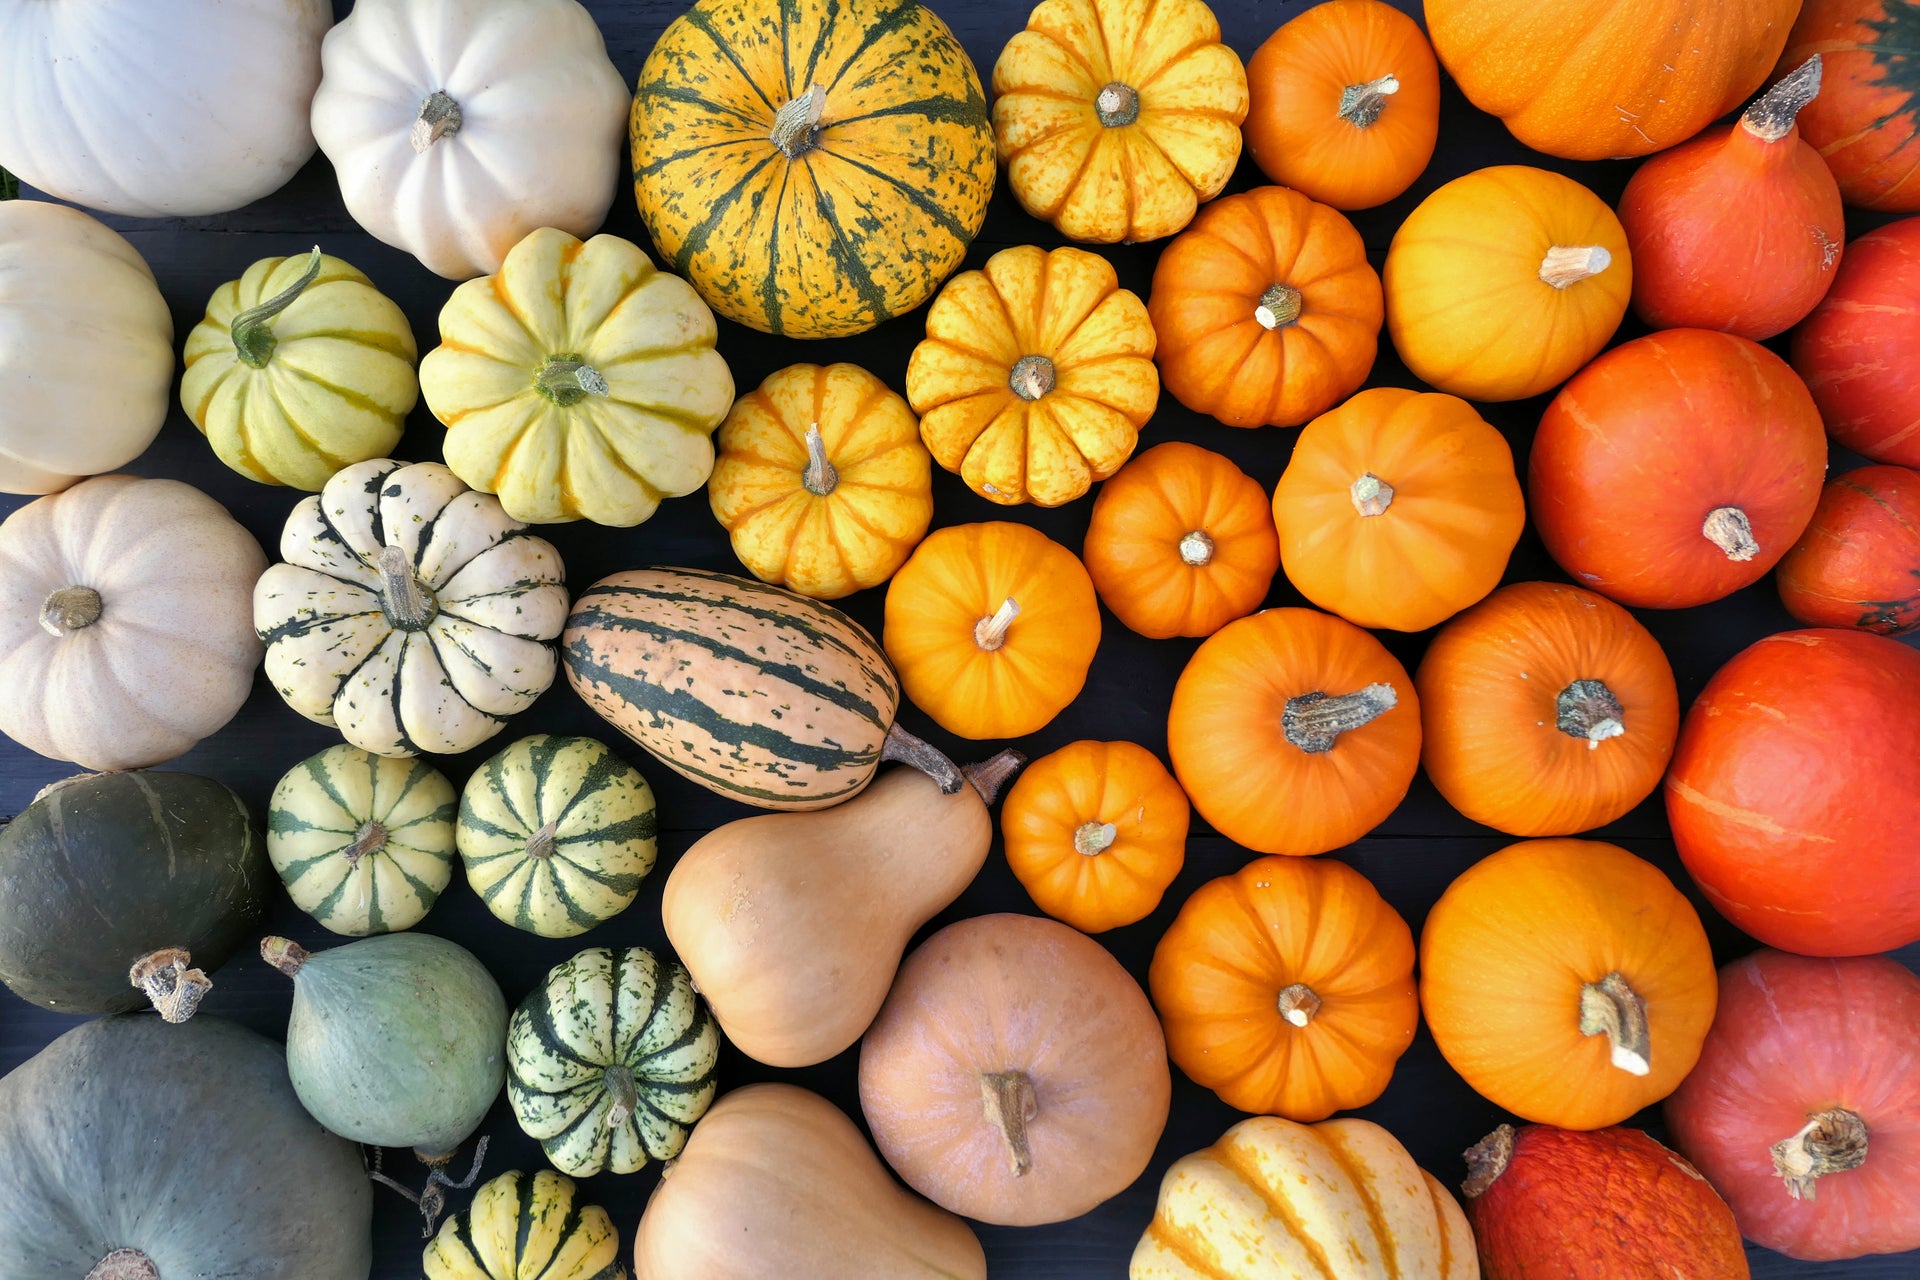 Think you know what an heirloom vegetable is?